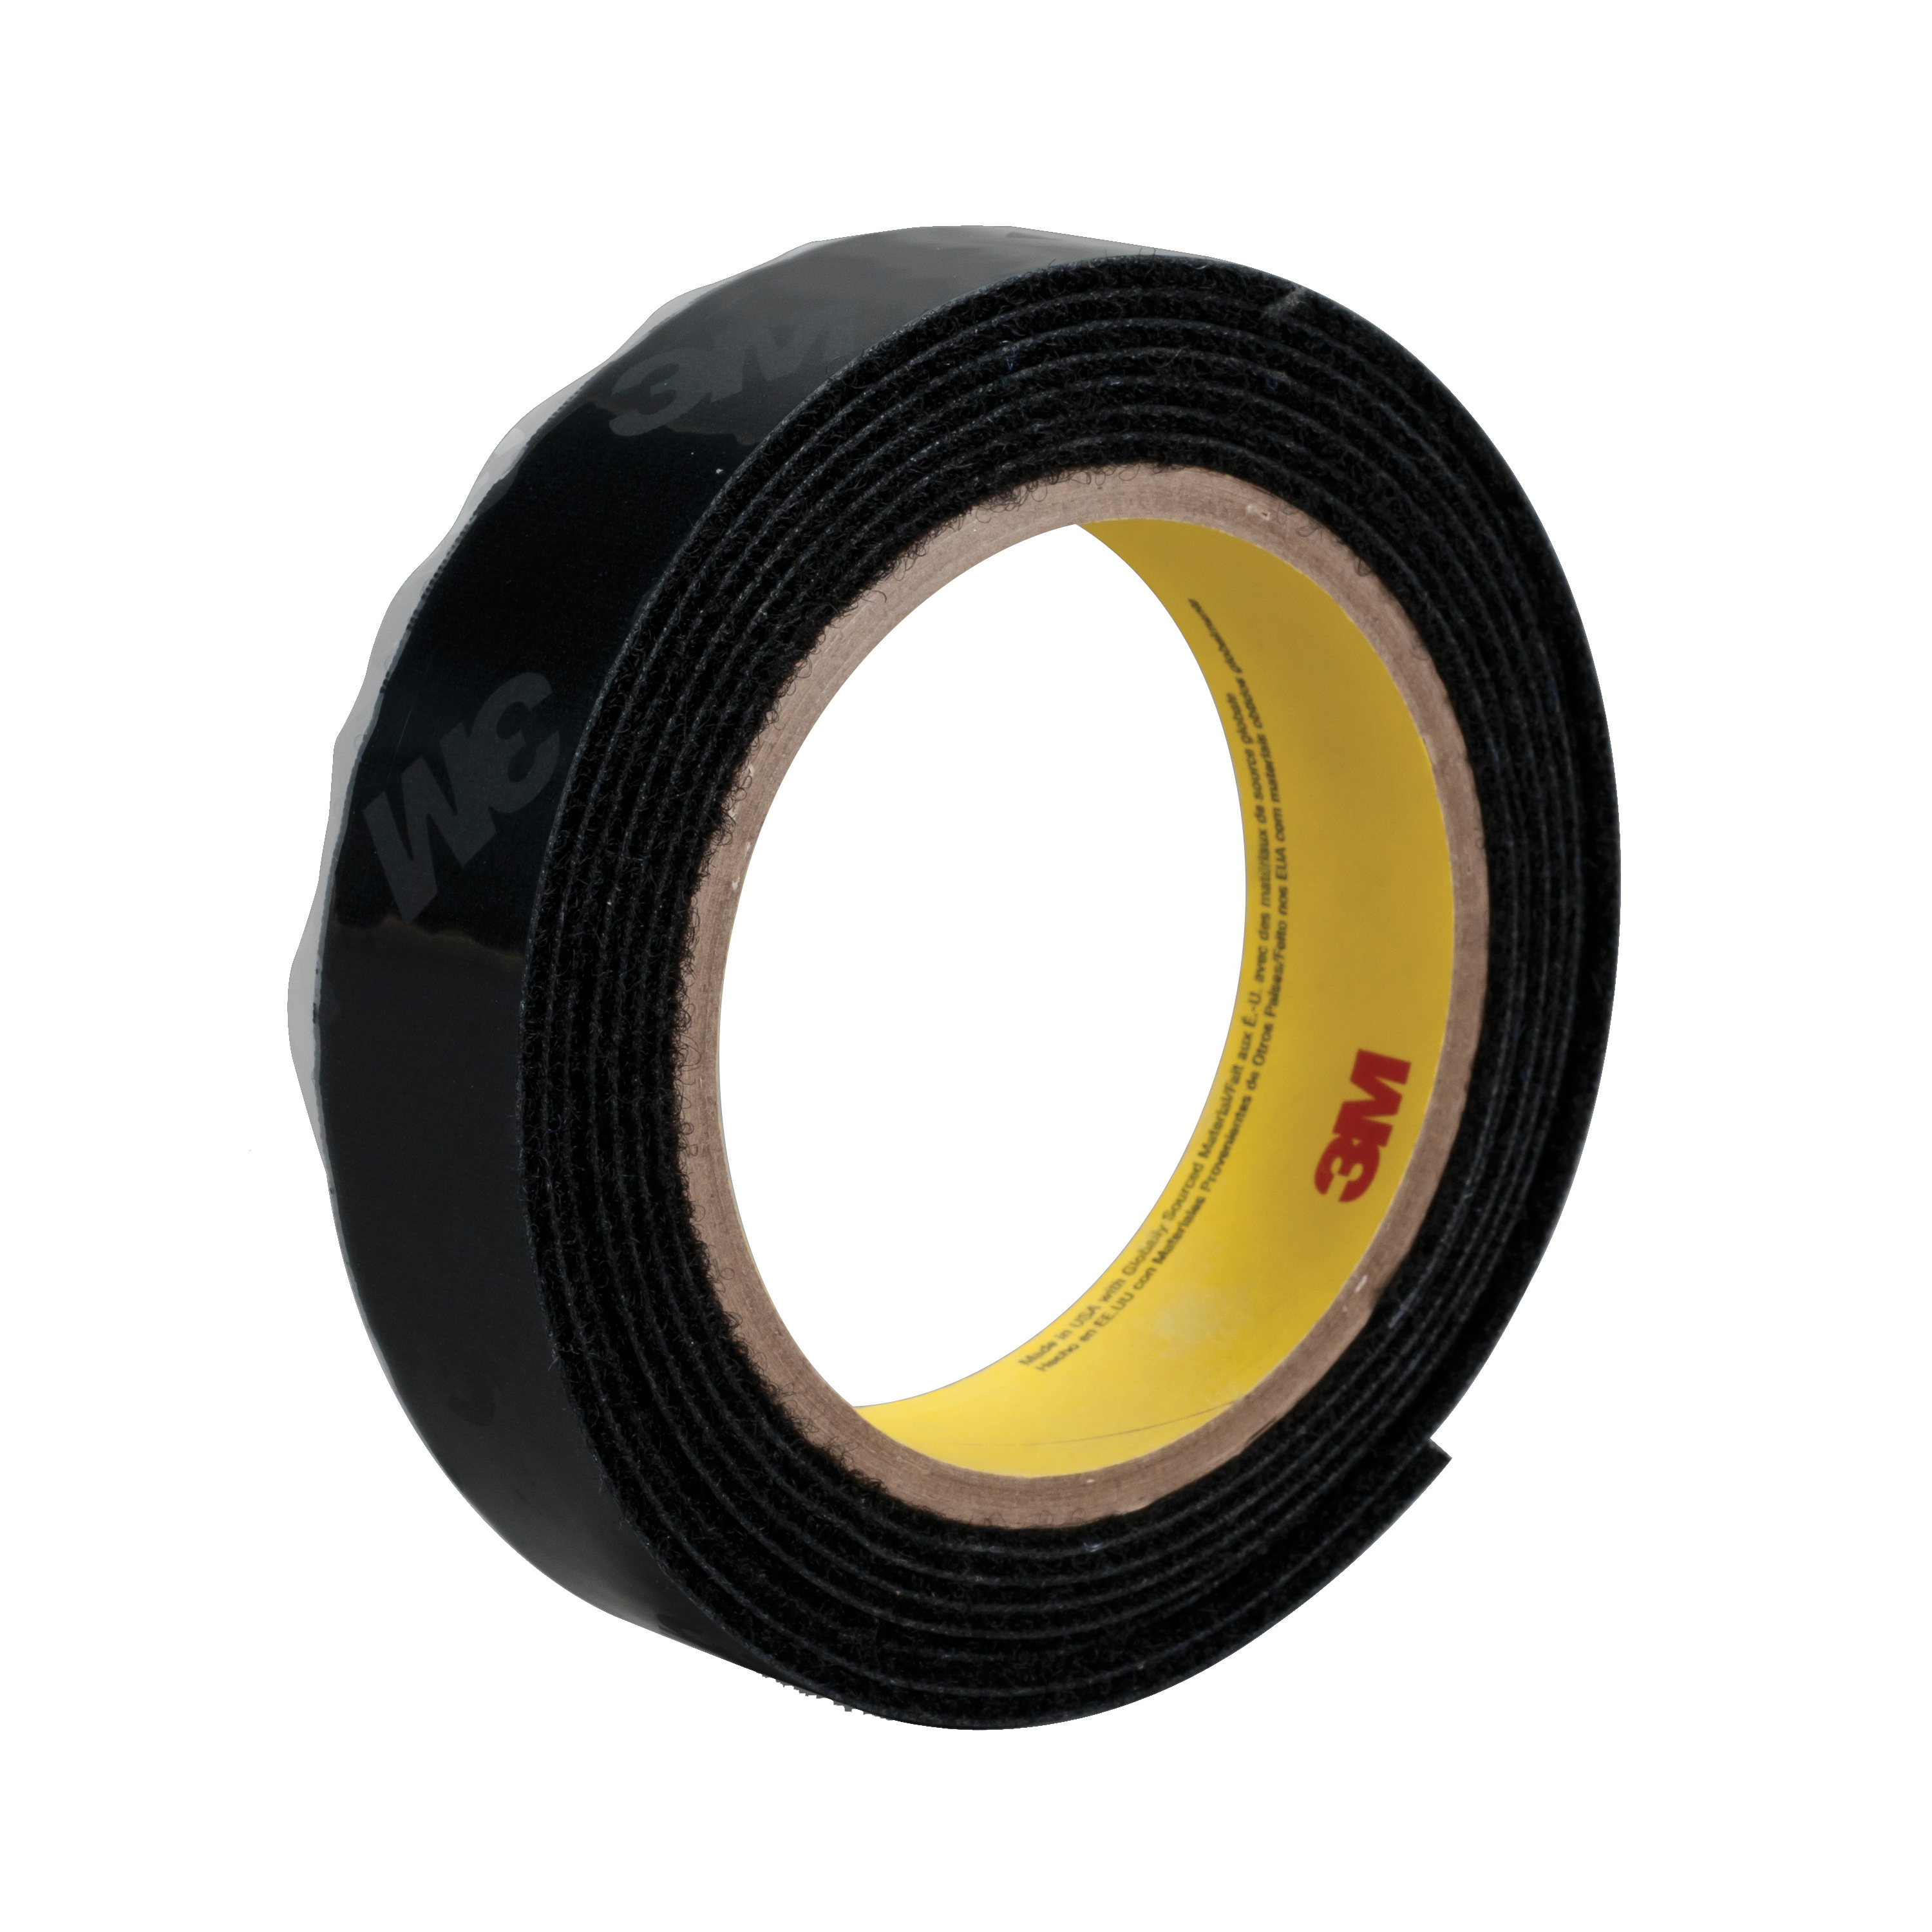 3M™ 021200-86289 Reclosable Loop Fastener Tape, 50 yd L x 5/8 in W, 0.15 in THK Engaged, High Performance Acrylic PSA Adhesive, Woven Nylon Backing, Black